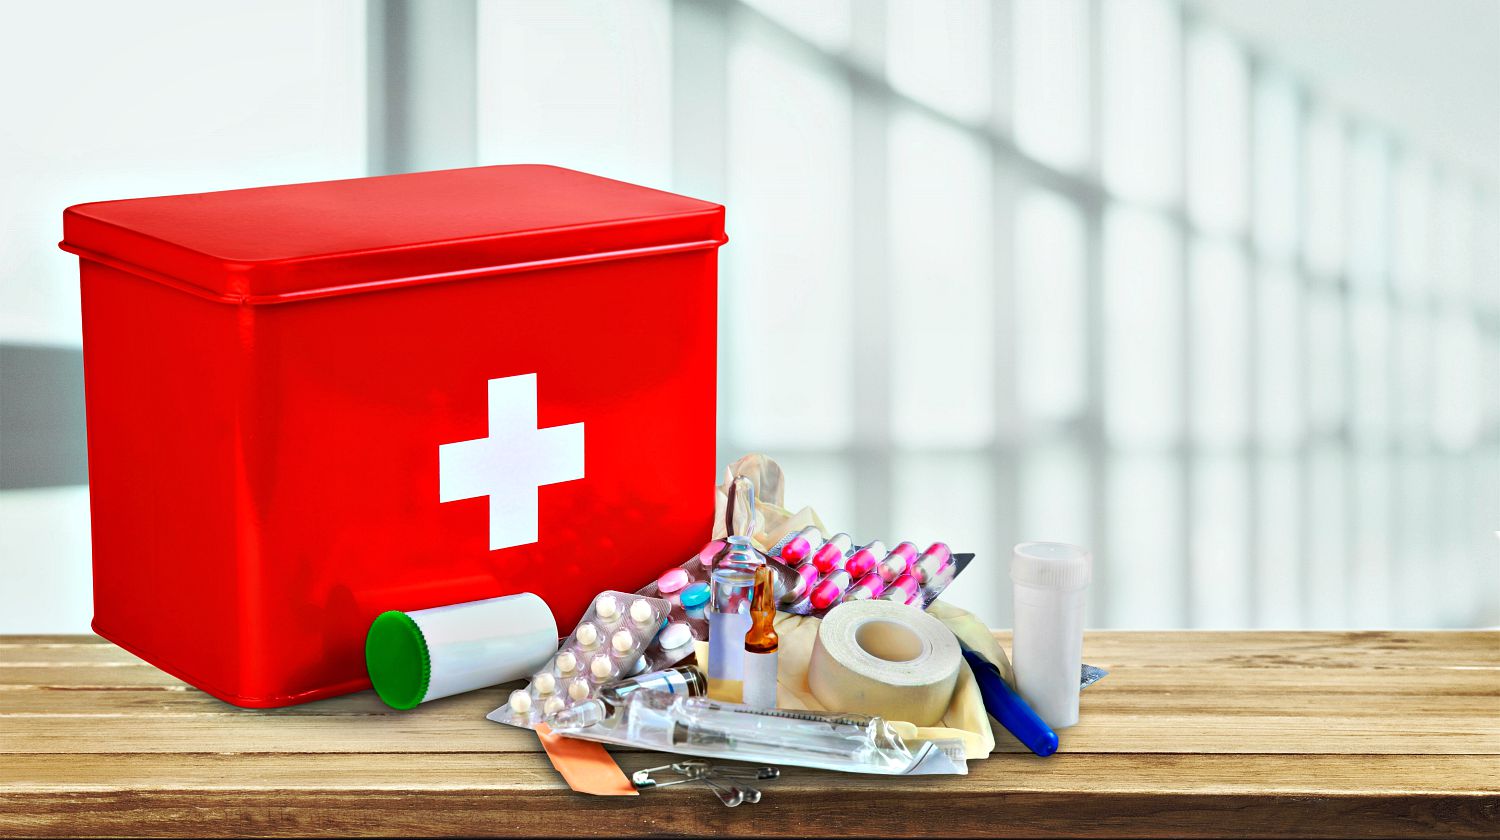 Feature | First aid kit with medical supplies | How To Build A First Aid Kit